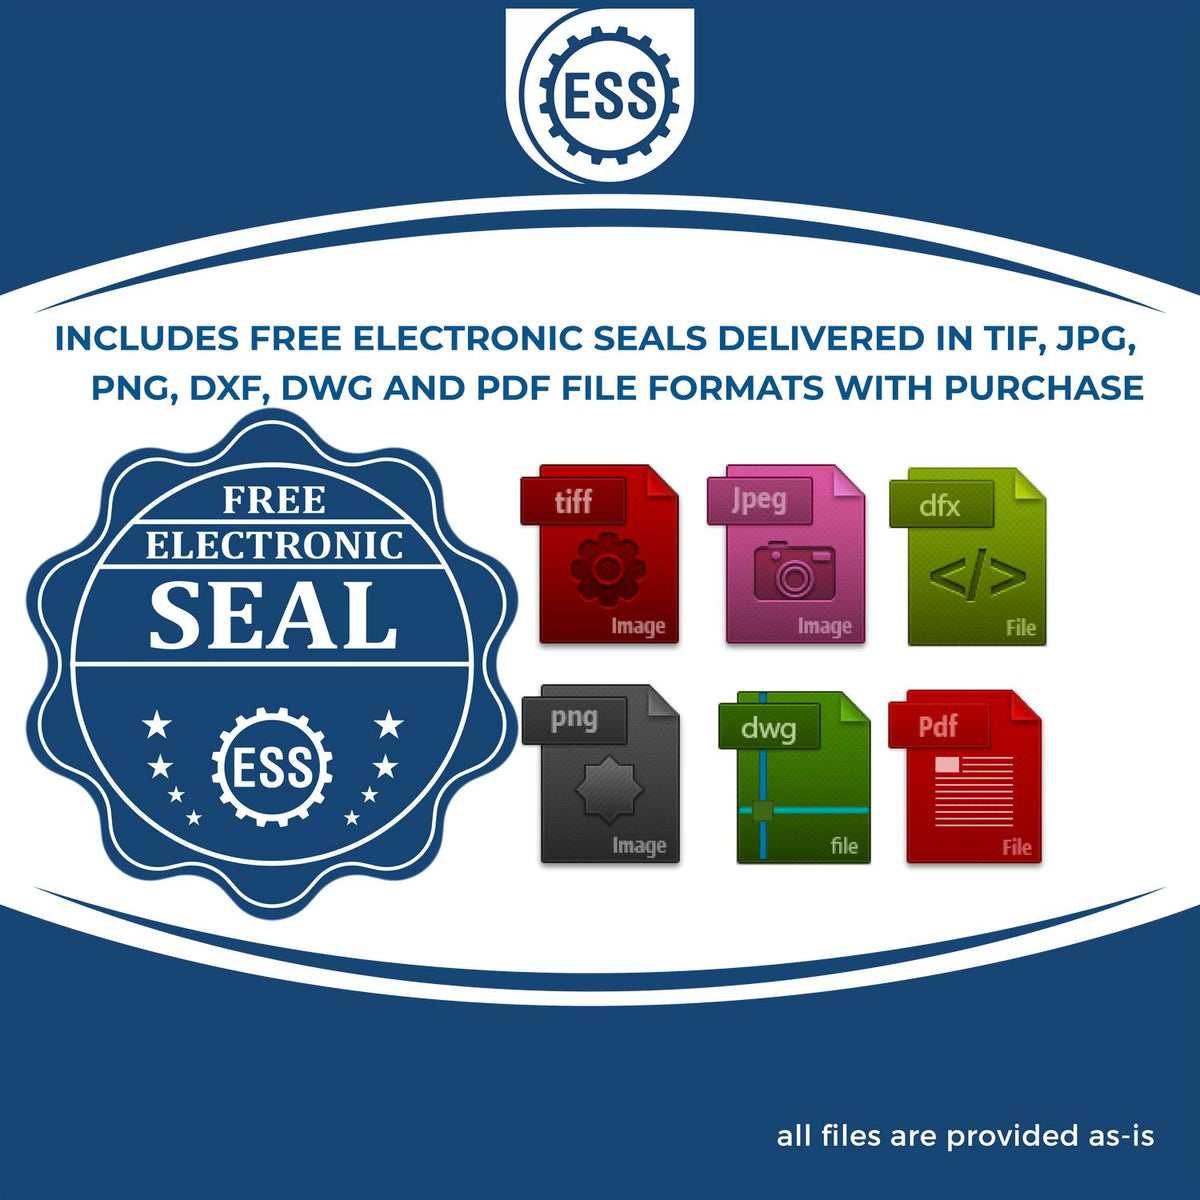 An infographic for the free electronic seal for the State of New Hampshire Extended Long Reach Geologist Seal illustrating the different file type icons such as DXF, DWG, TIF, JPG and PNG.